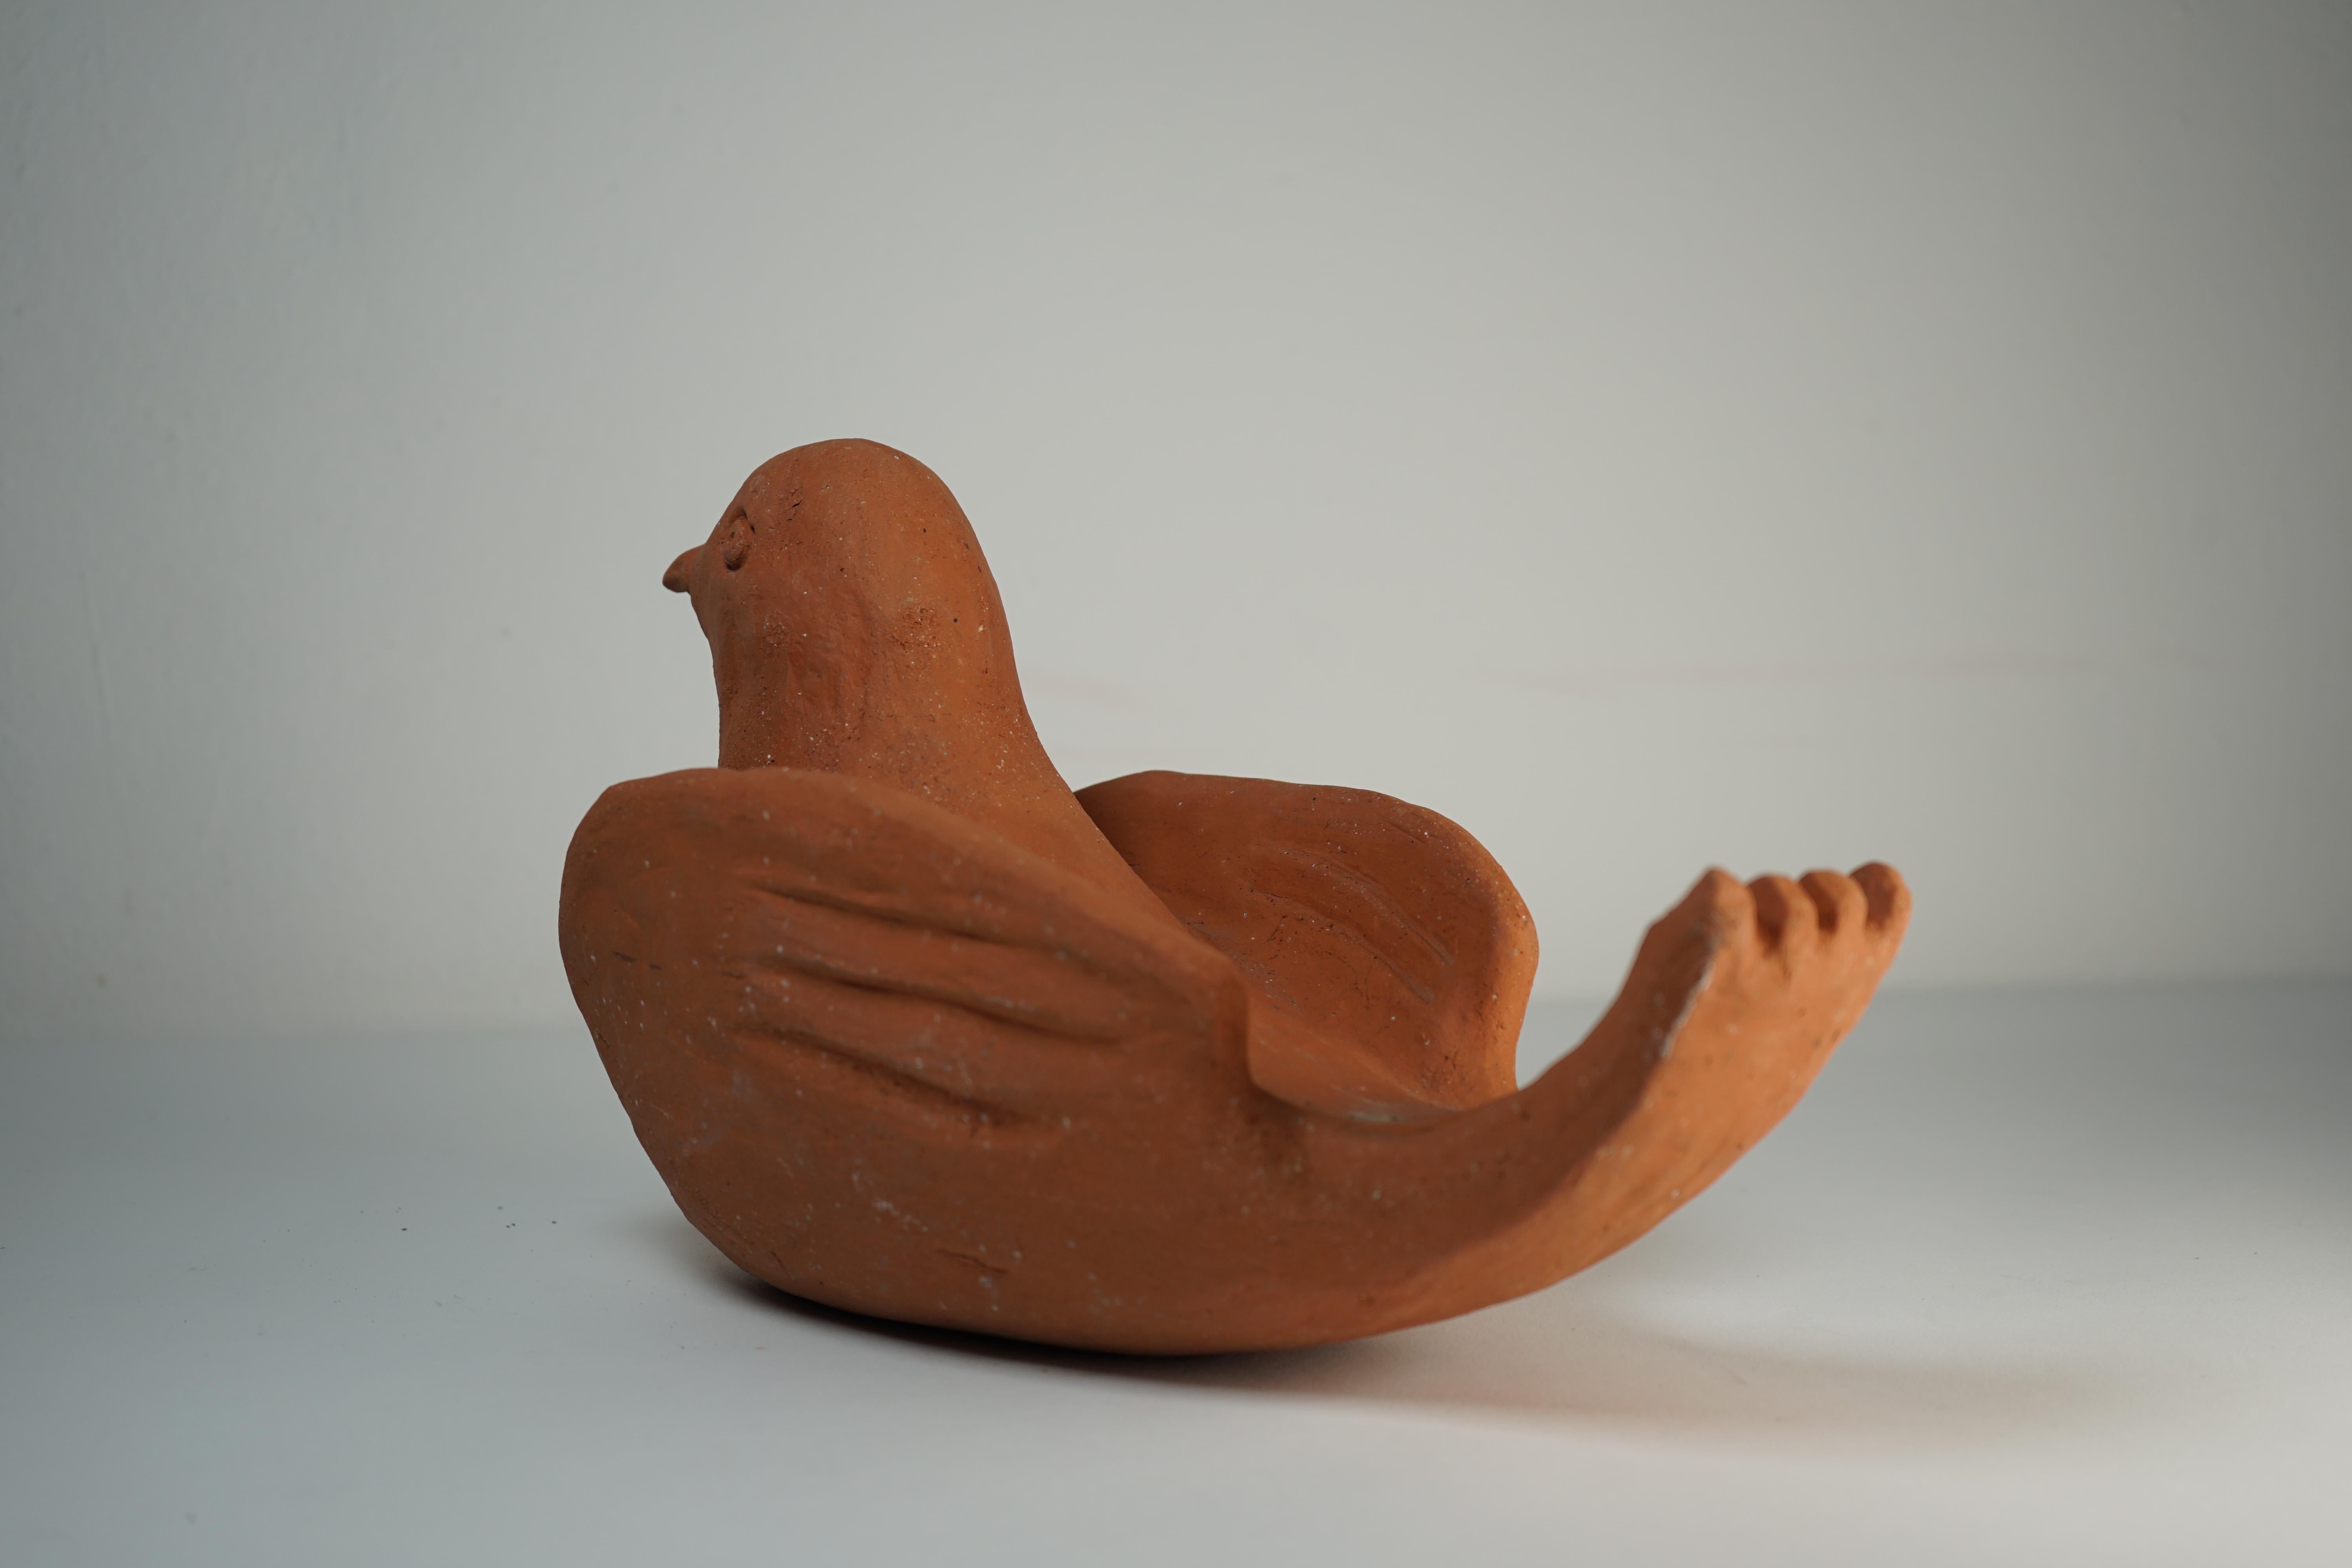 Modern Ceramic Sculpture Dove Model by Nathalie Du Pasquier for Alessio Sarri Editions For Sale